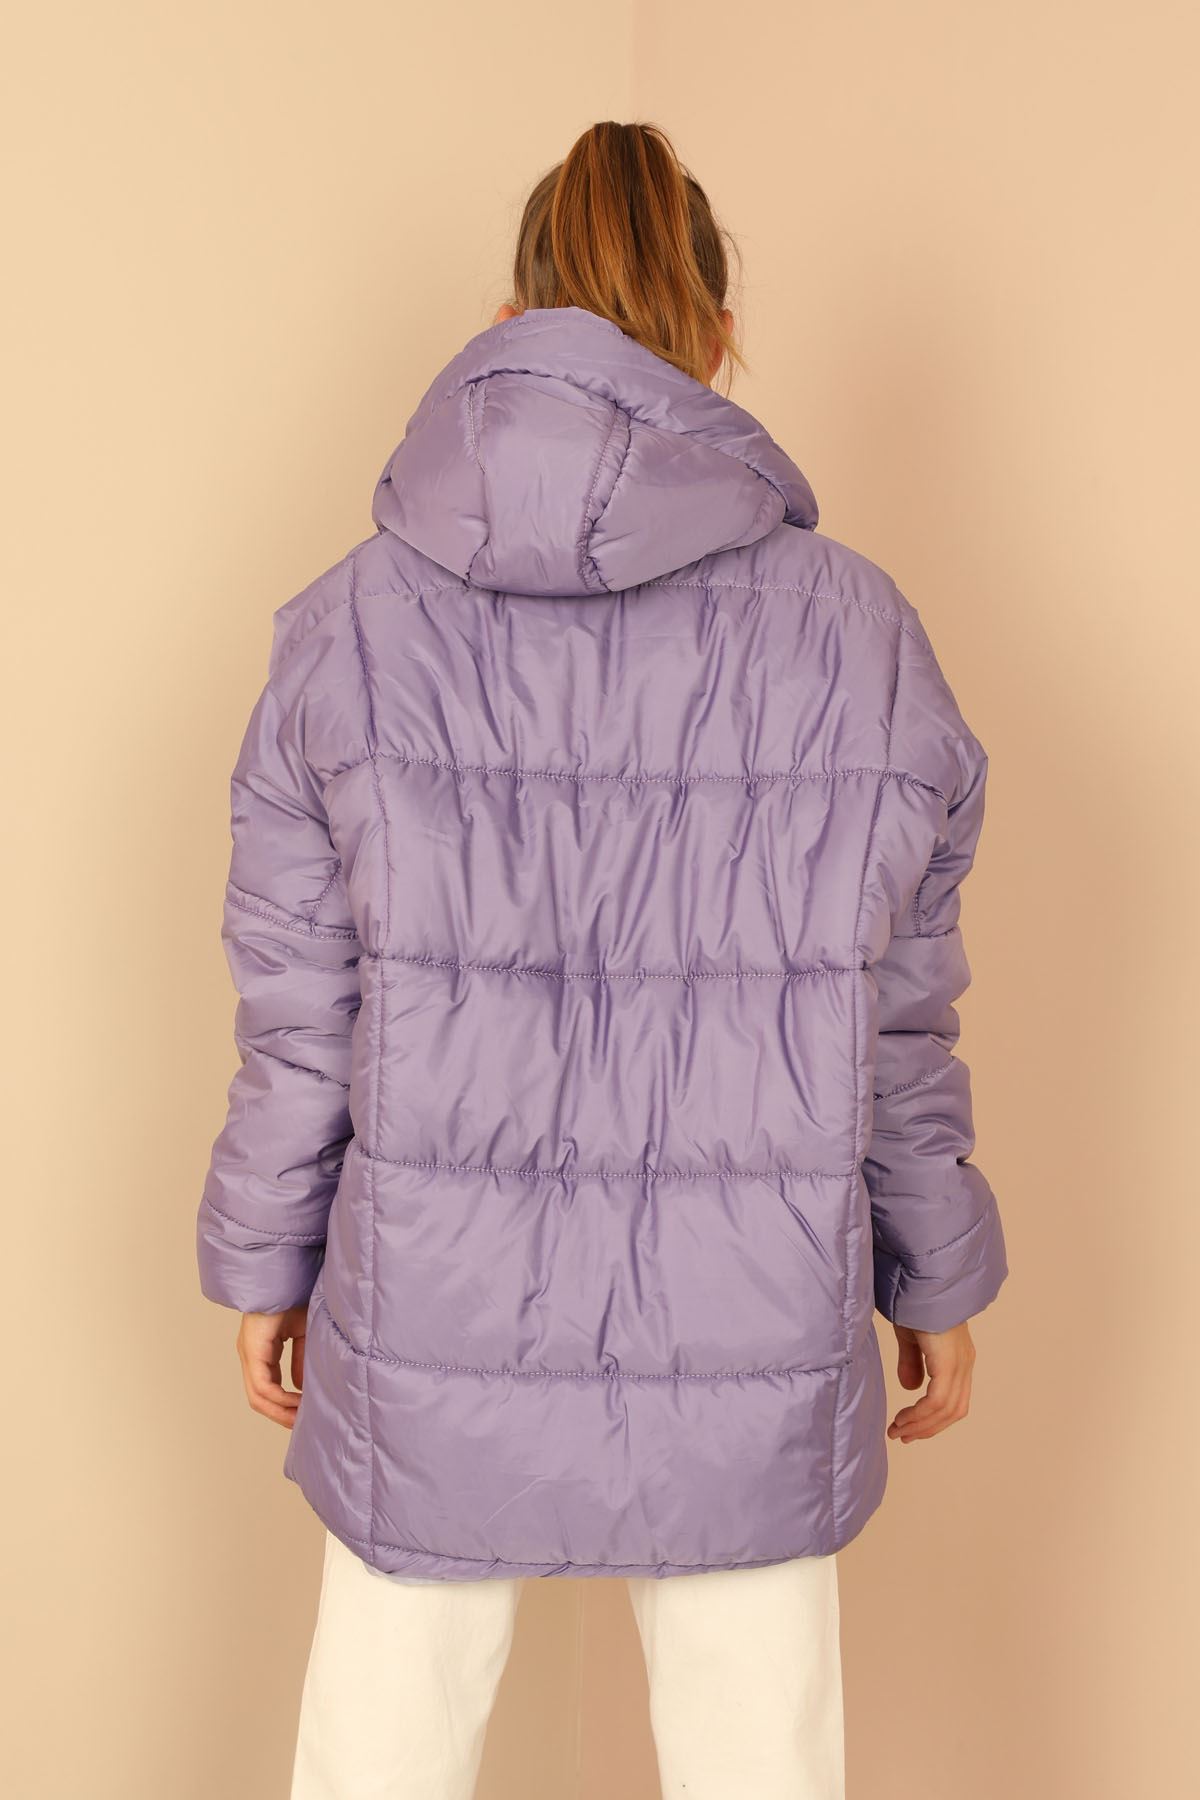 Quilted Fabric Long Sleeve Zip Neck Short Oversize Women Coat - Lilac